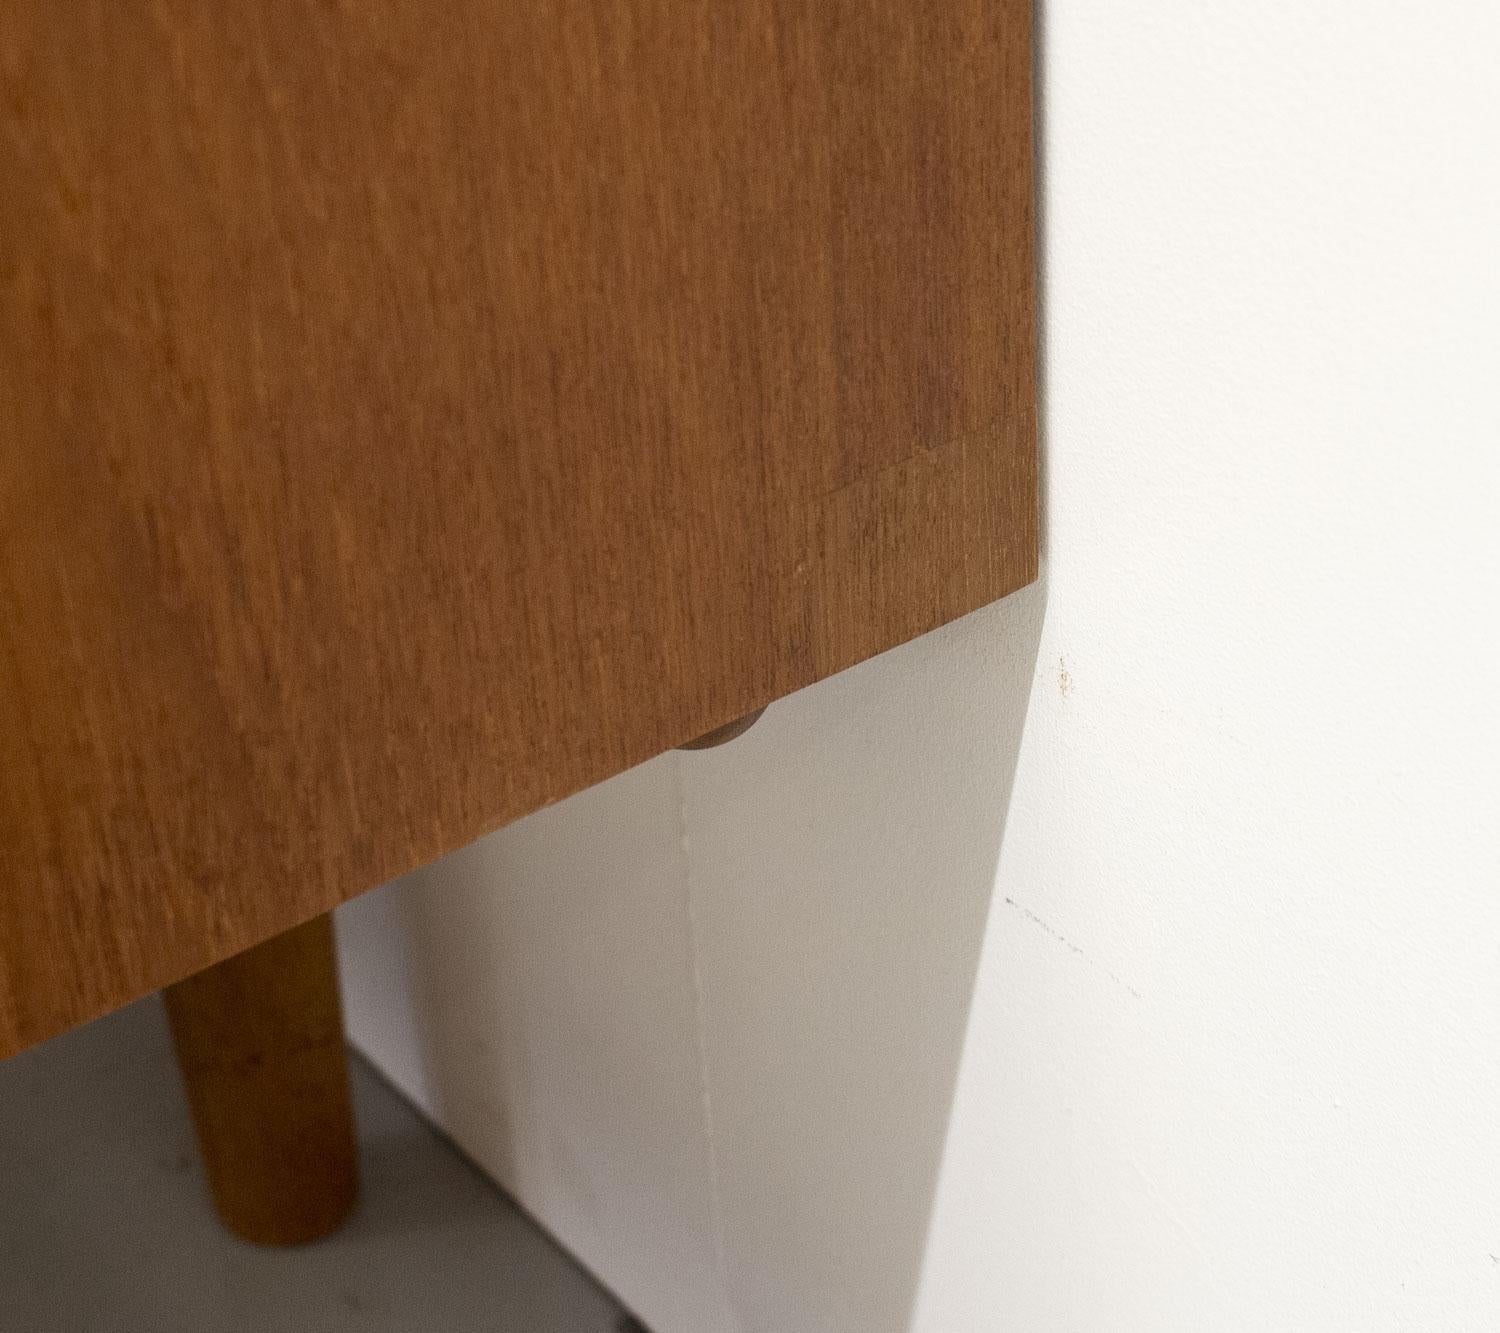 Danish Large Teak Chest of Drawers by Borge Mogensen for Soborg, 1950s For Sale 5